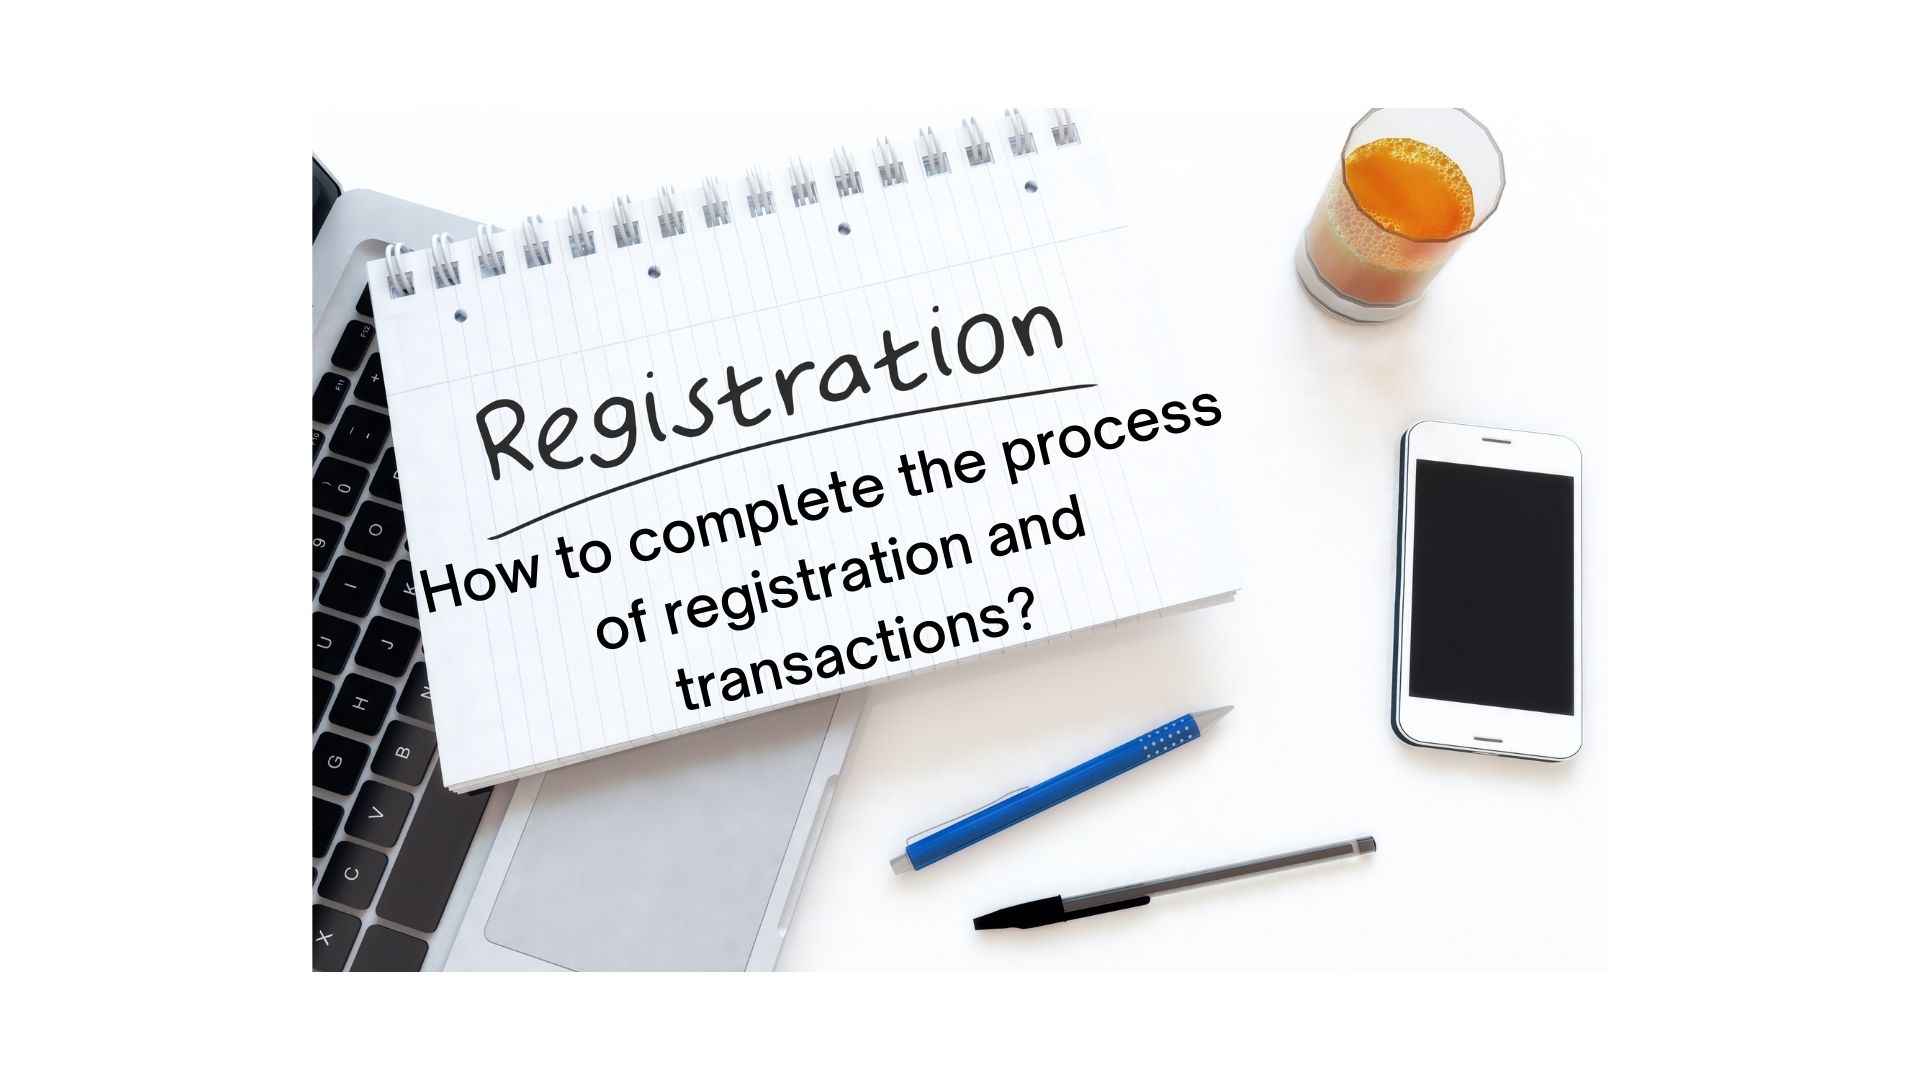 How to complete the process of registration and transactions?